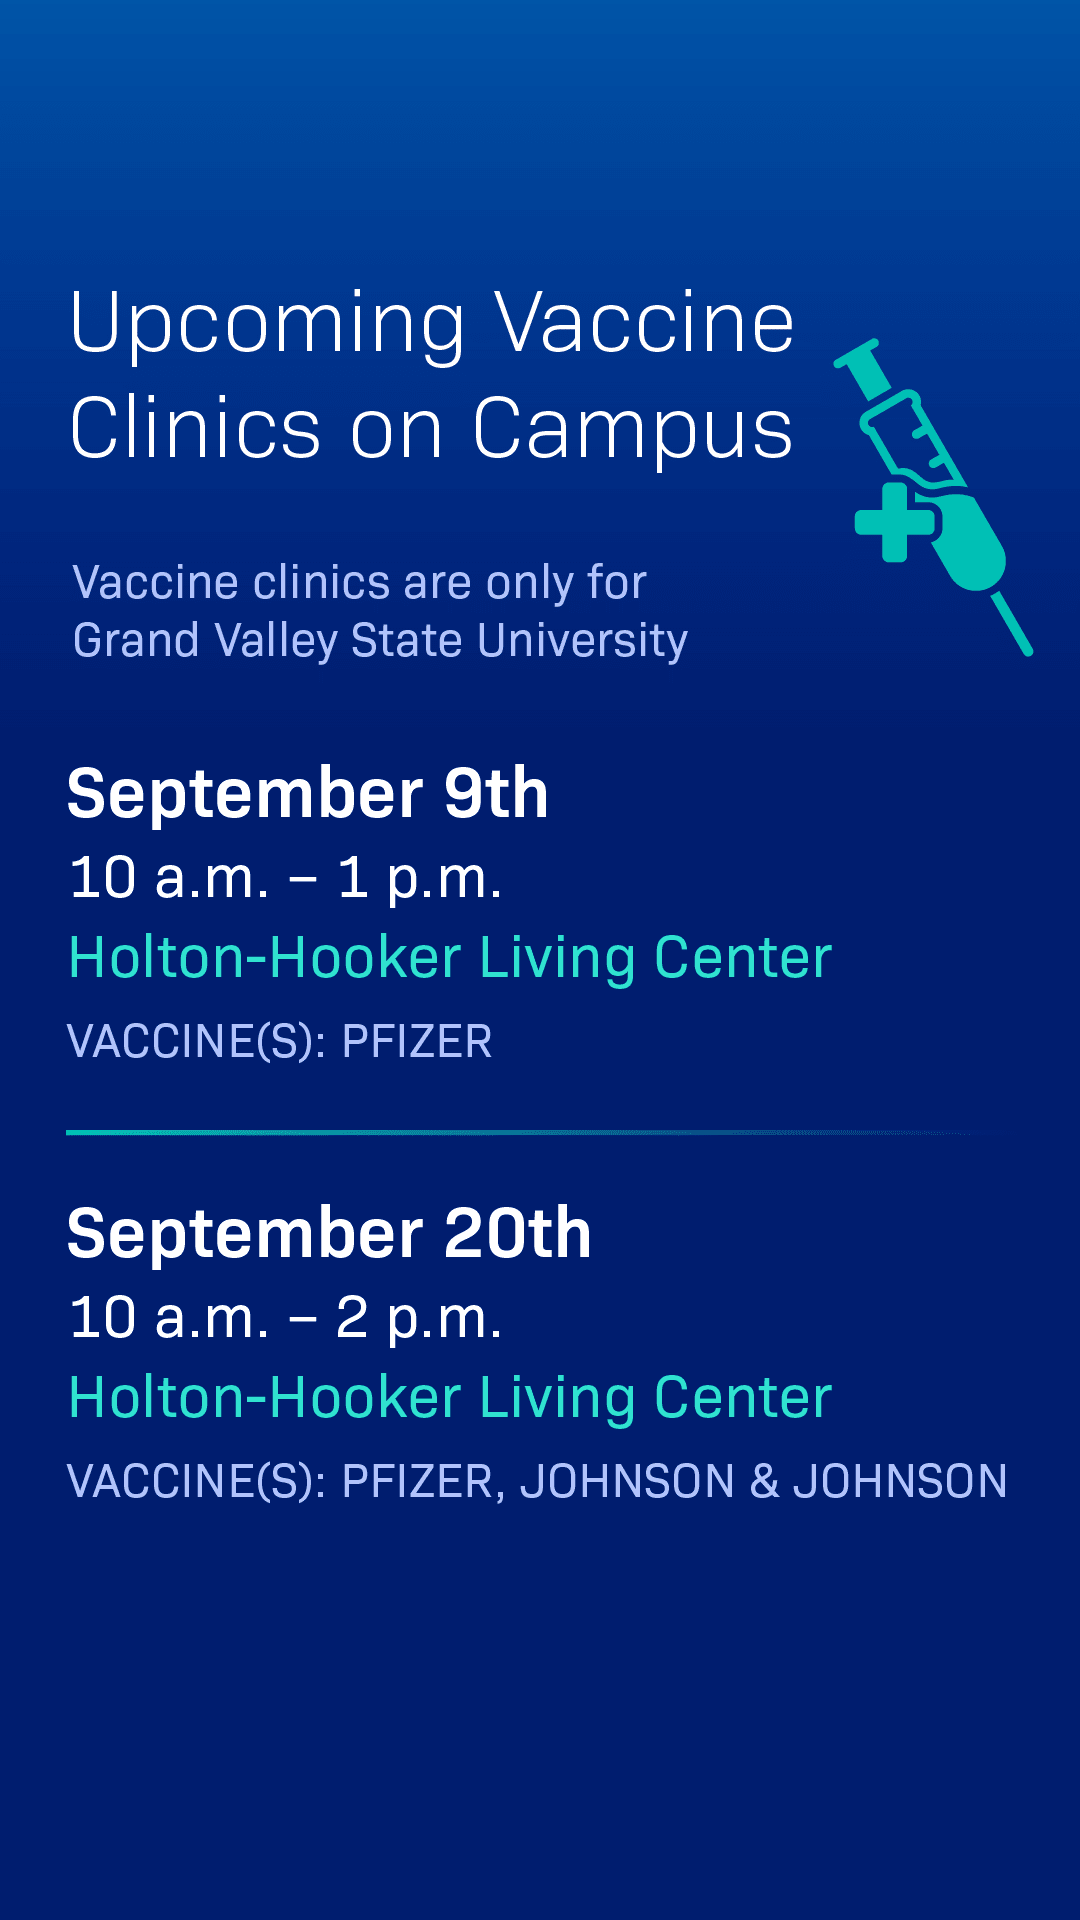 A graphic titled Upcoming Vaccine Clinics on Campus, featuring locations and dates for GVSU vaccine clinics. Formatted for Instagram stories.